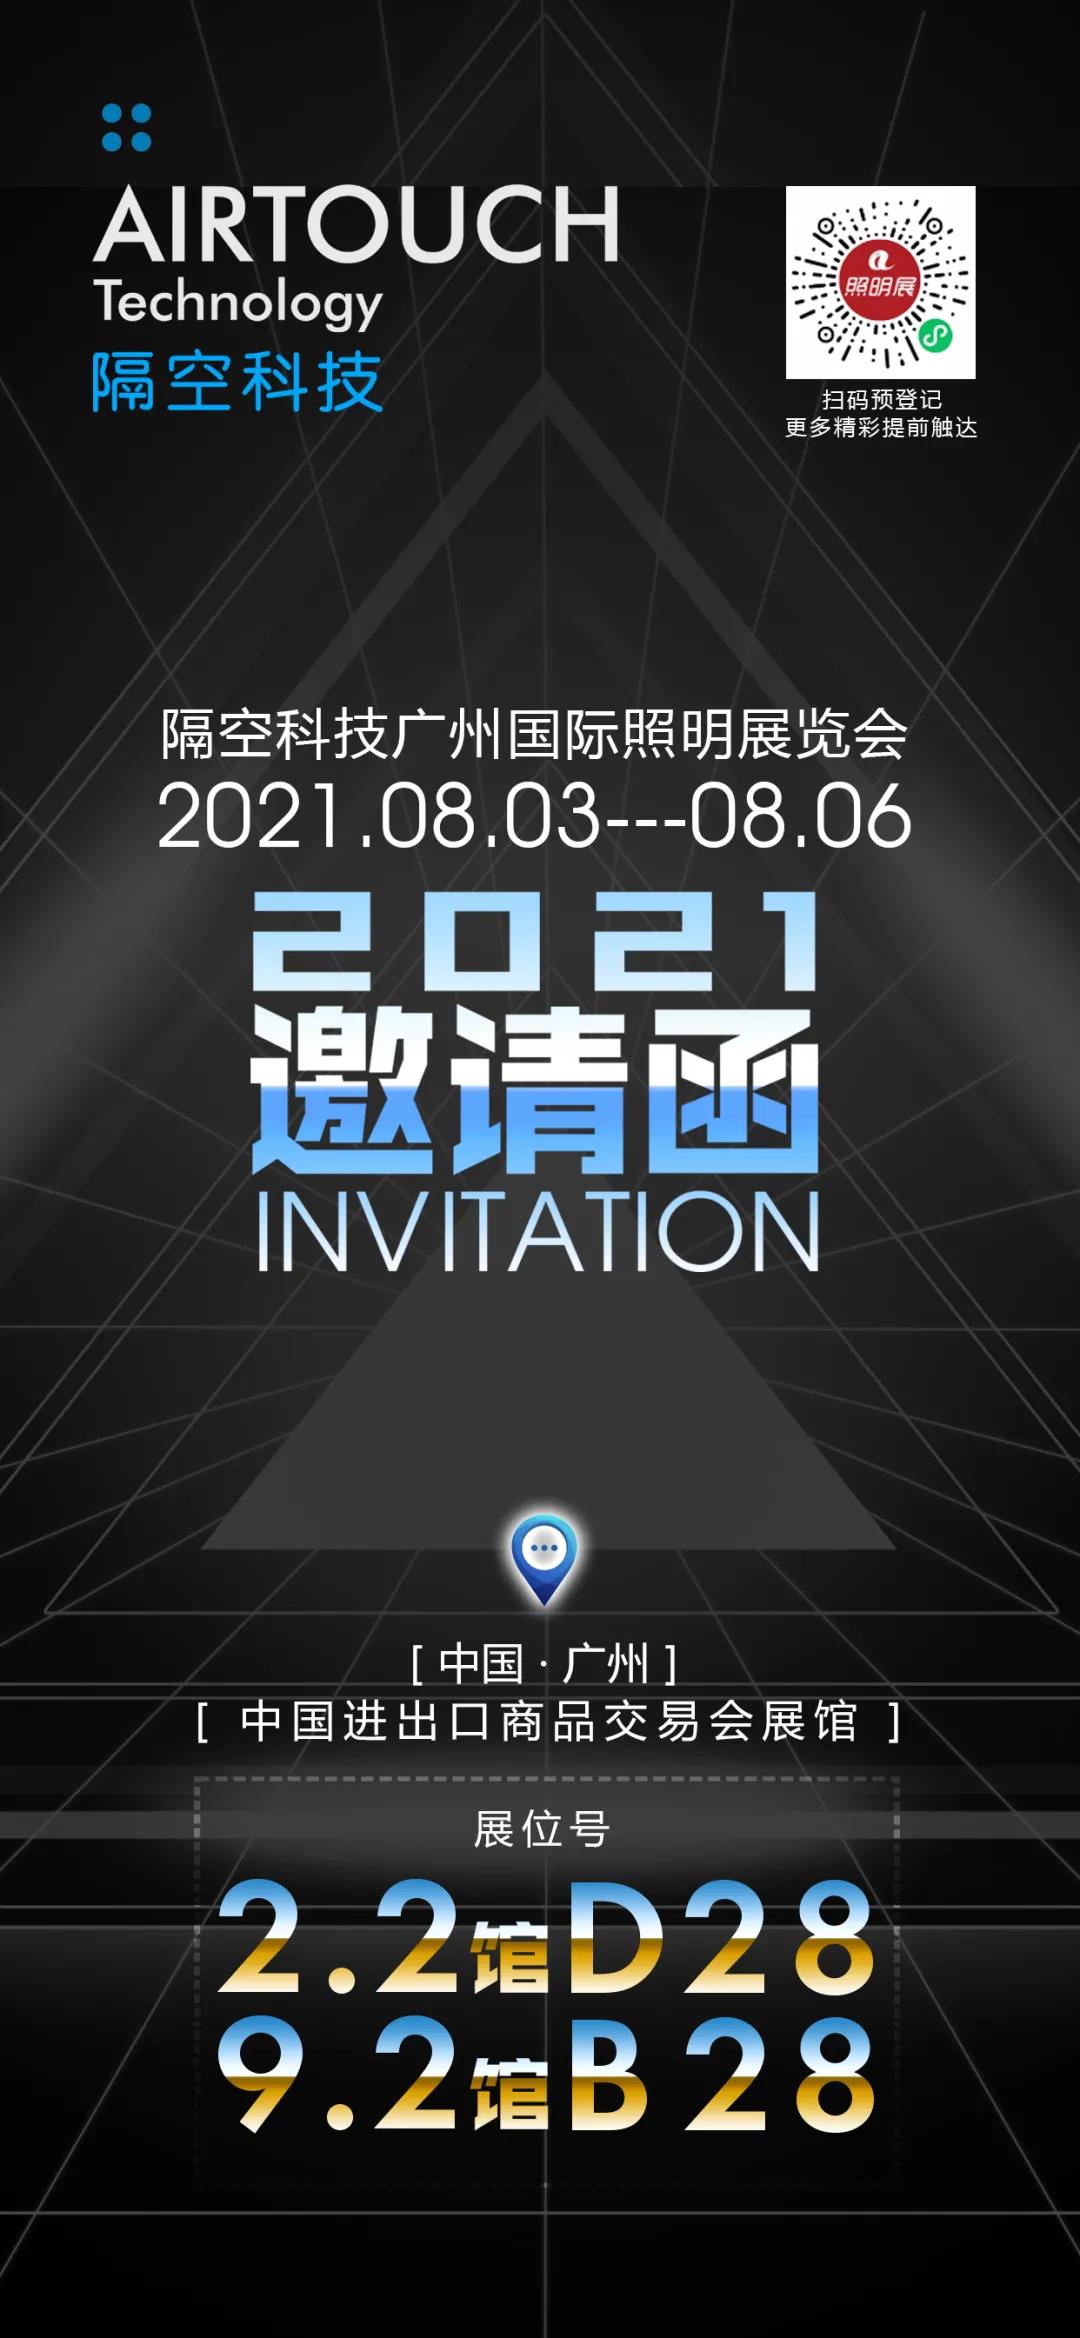 Exhibition Invitation | Go with the companion, Airtouch Technology invites you to meet at the Guangzhou International Lighting Fair!